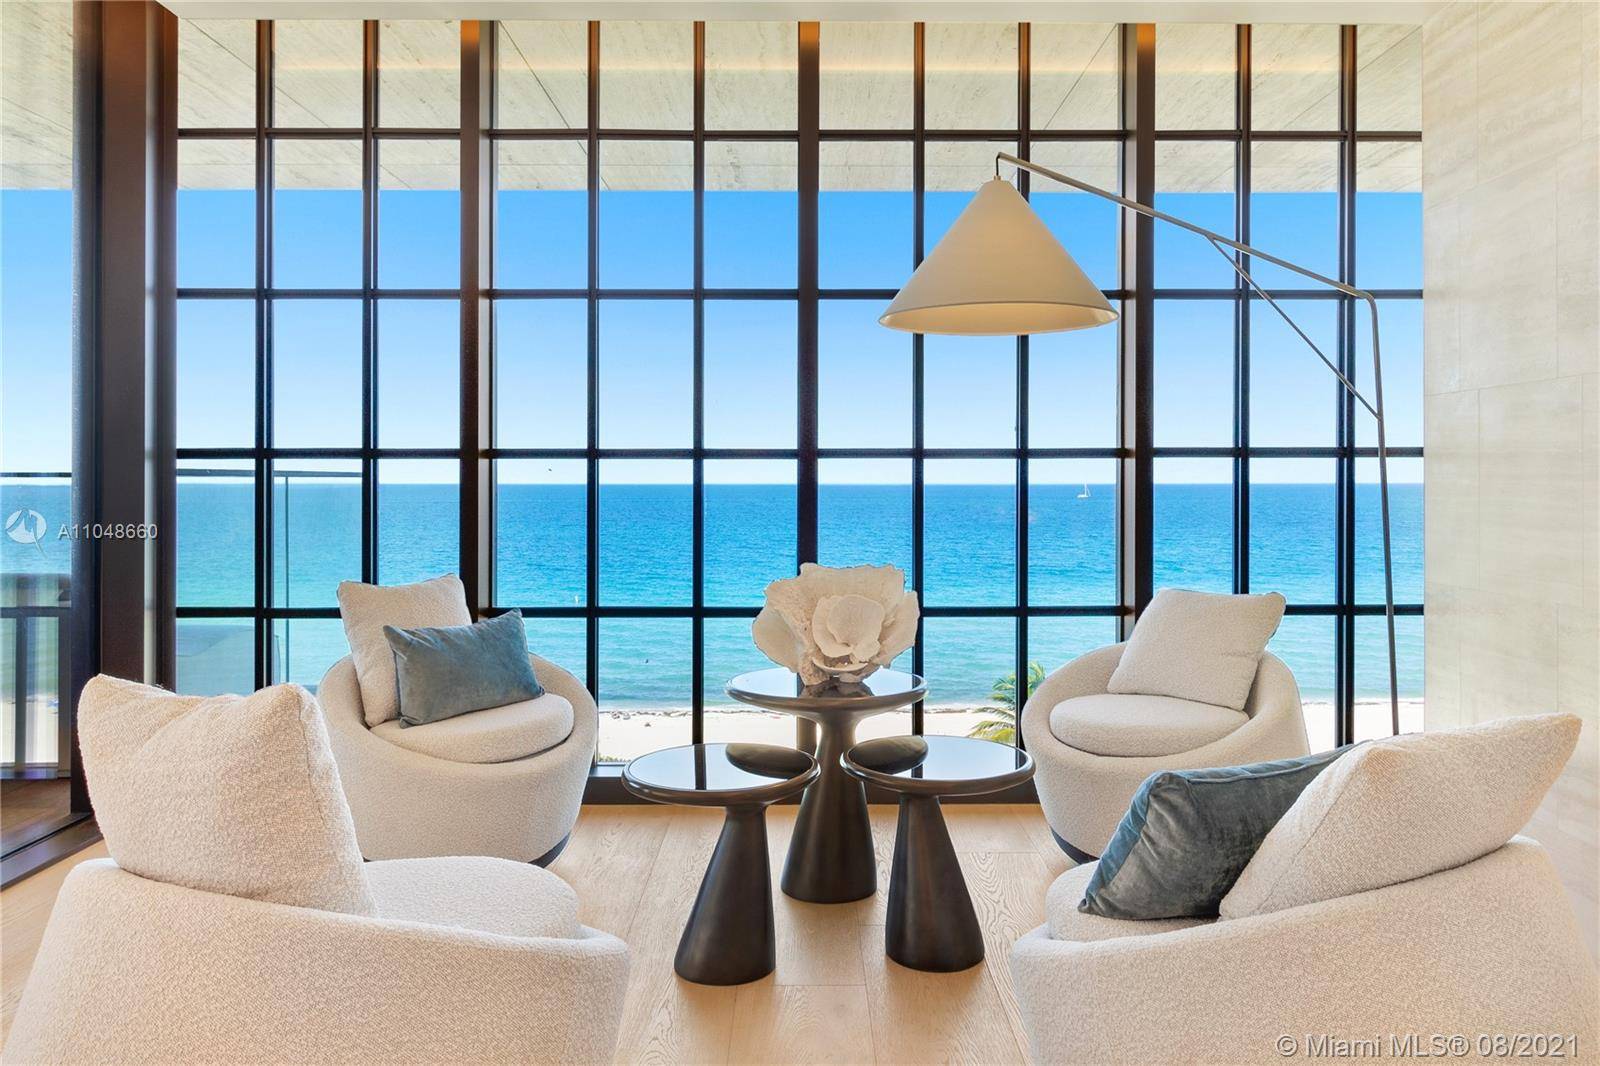 ARTE IS A CURATED COLLECTION OF 16 LUXURY OCEANFRONT RESIDENCES, IN THE EXCLUSIVE NEIGHBORHOOD OF SURFSIDE, BY ARCHITECTURE AND DESIGN PARTNERSHIP OF CITTERIO VEIL WITH KOBI KARP.